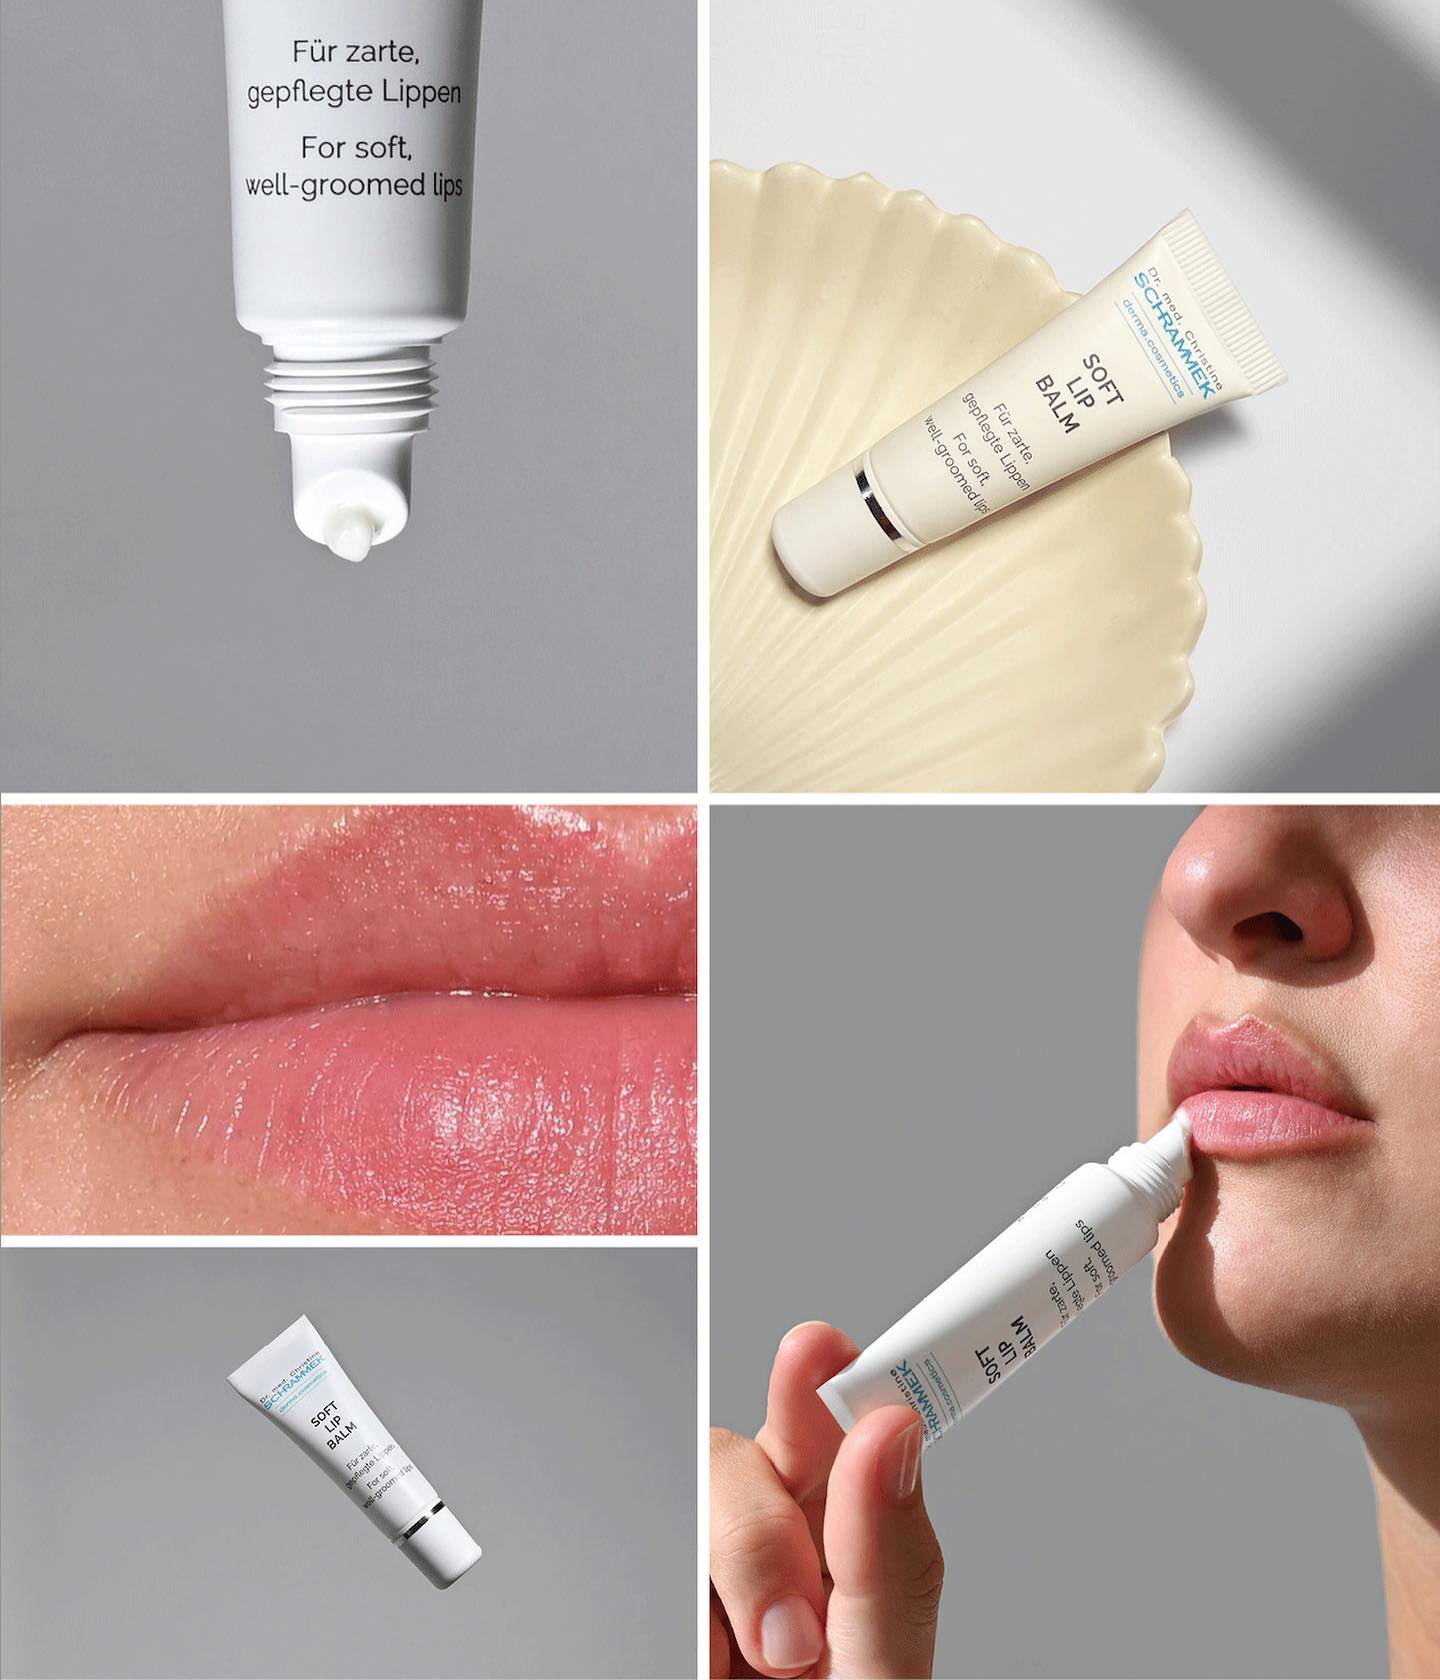 «Welcome to the future of lip care, where lightness meets effectiveness.» - Christina Drusio, MD